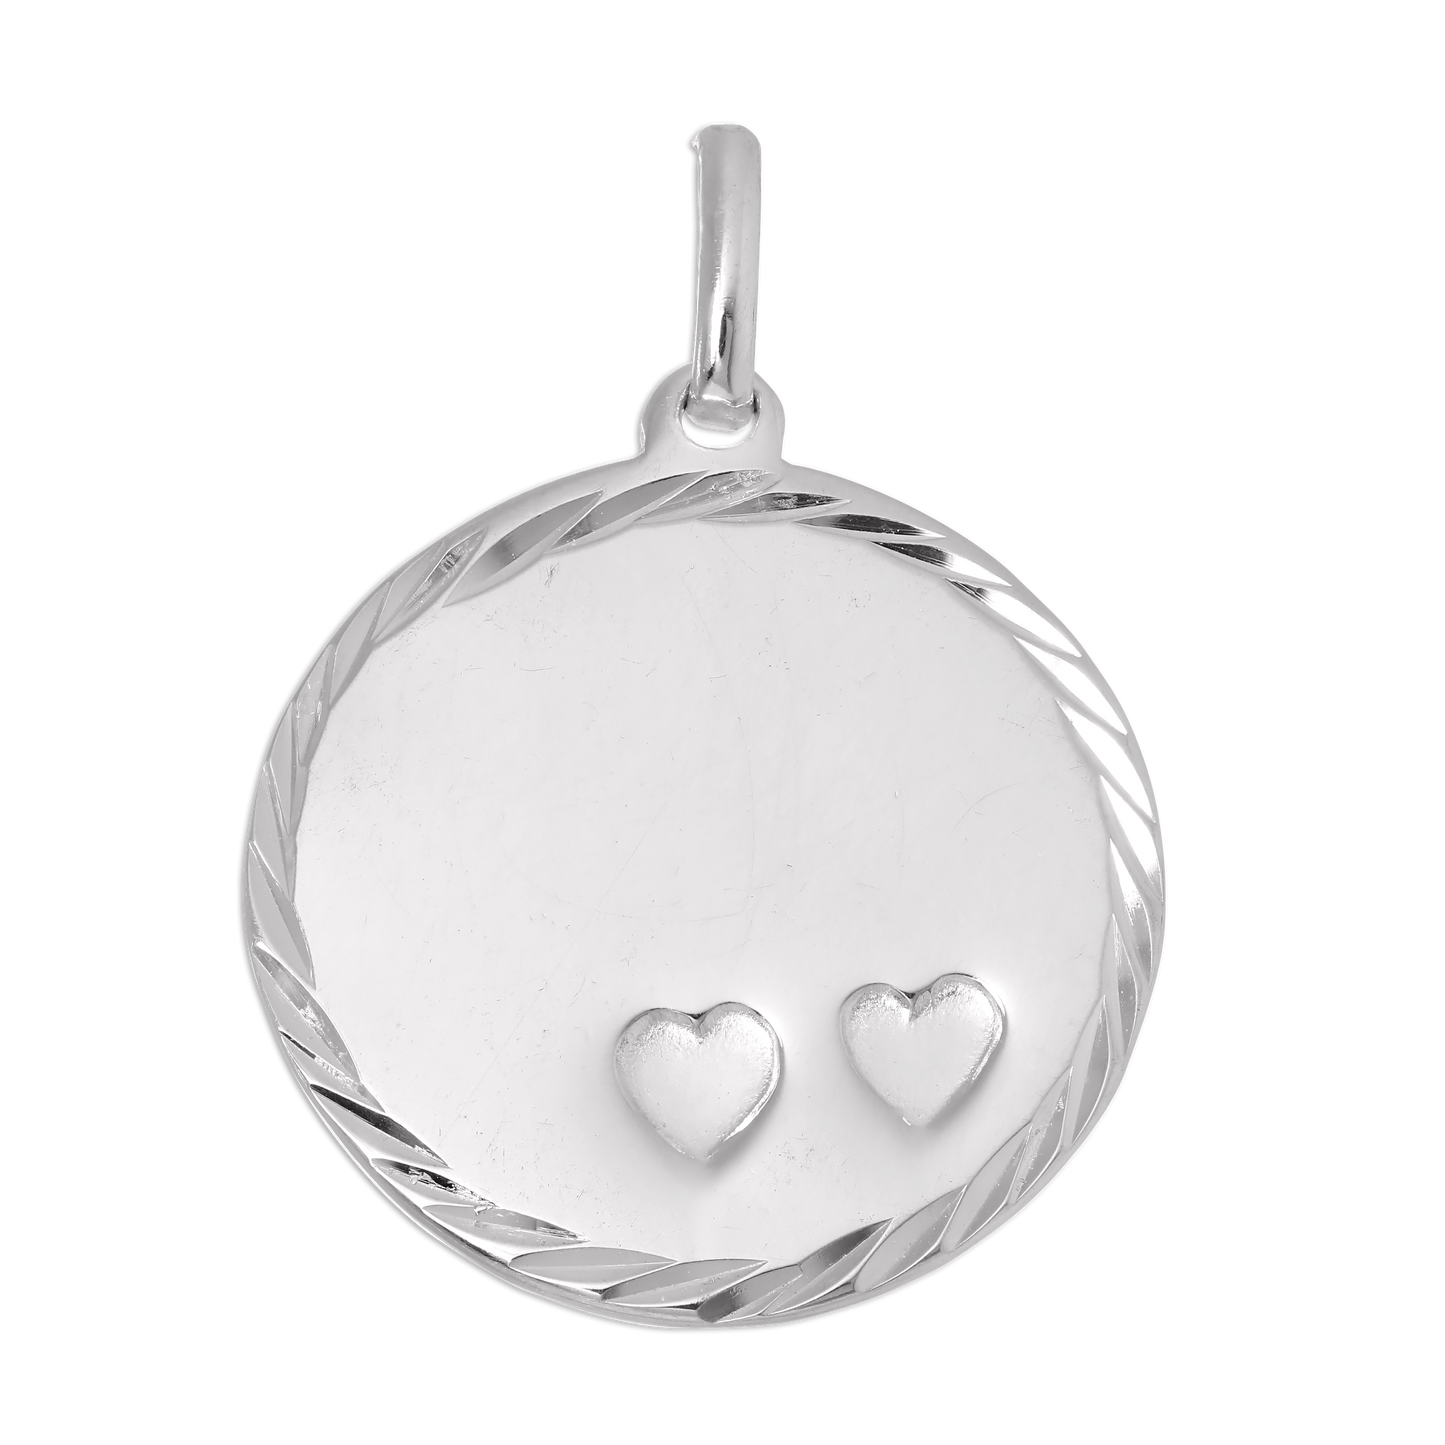 Heavy Sterling Silver Engravable Tag with Two Hearts